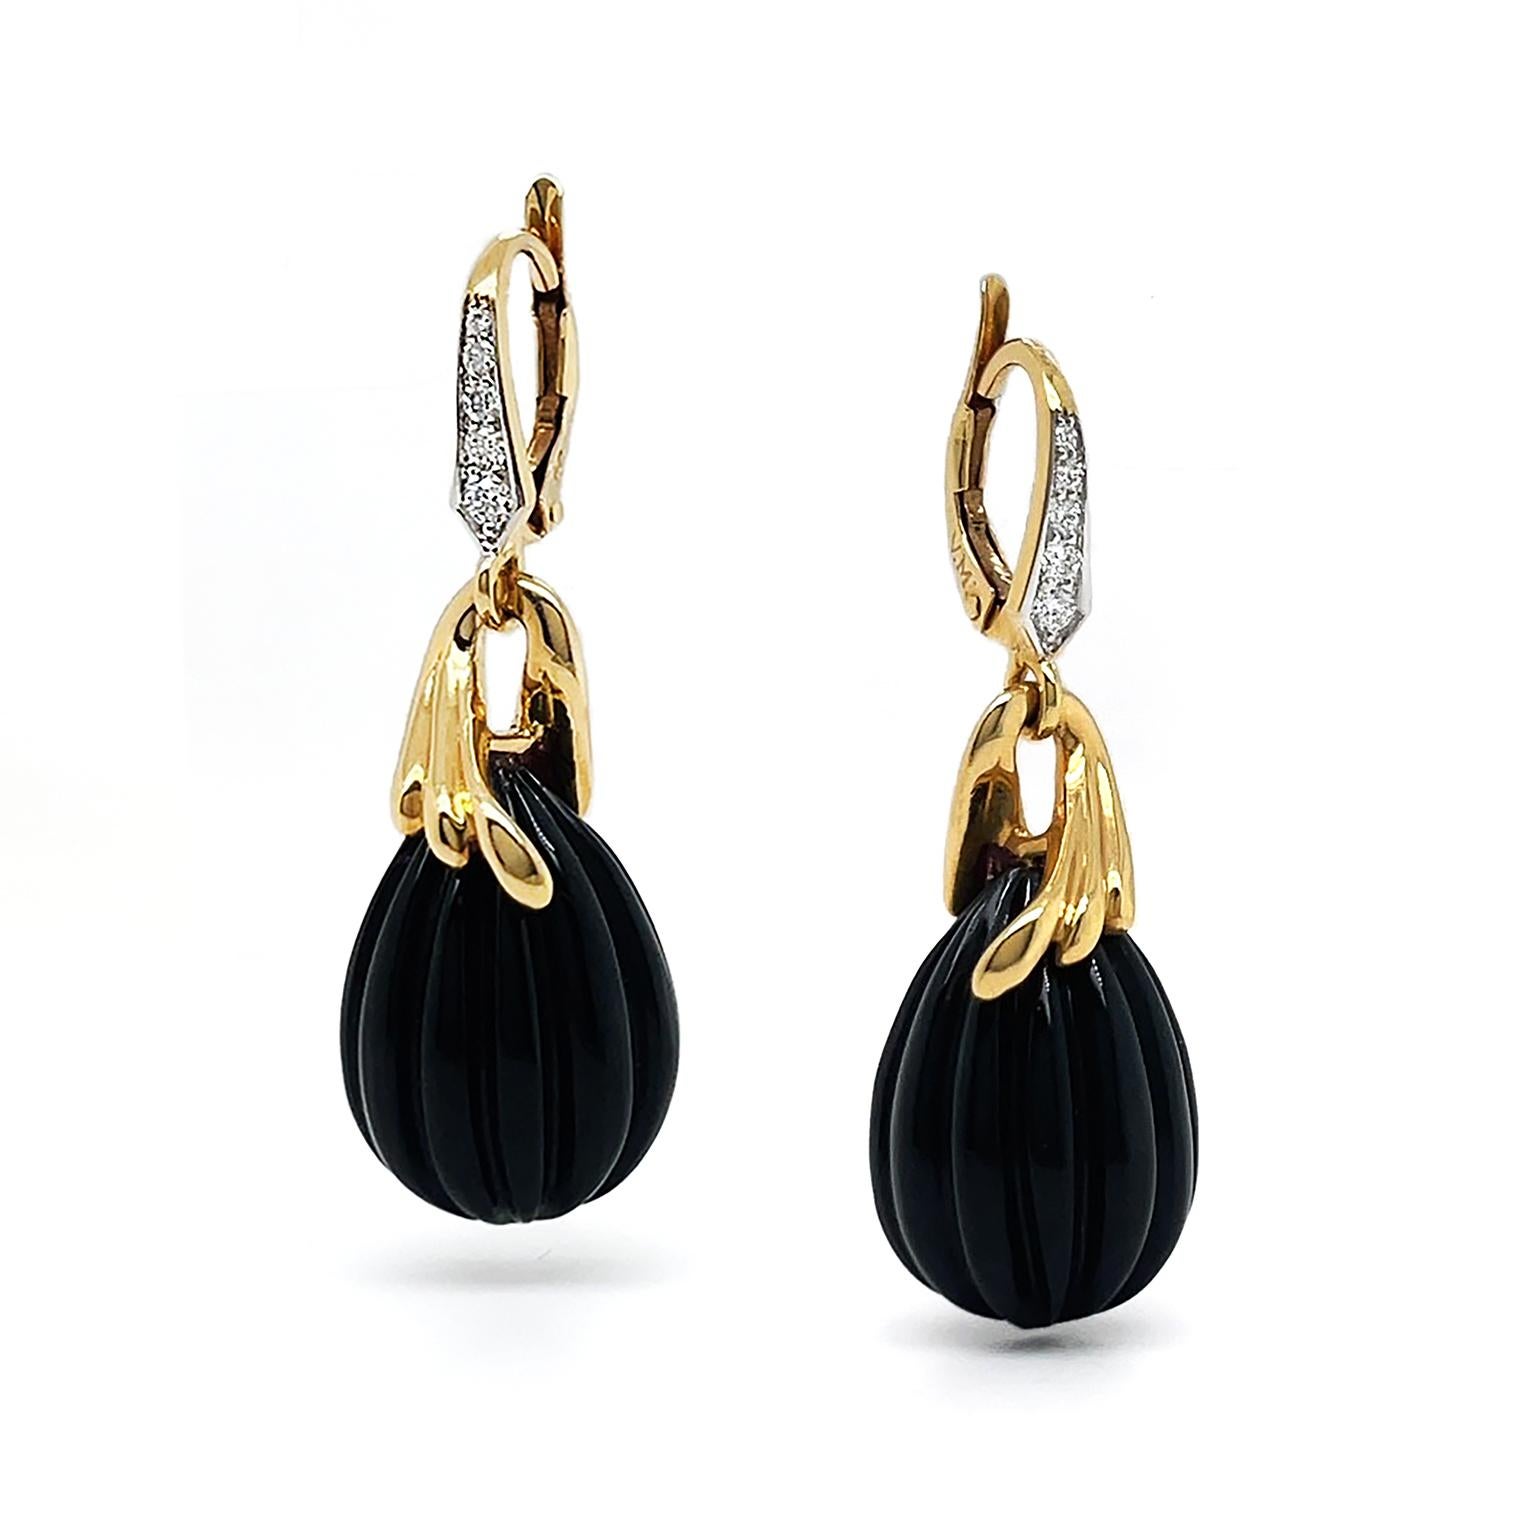 Diamonds and gold combine with onyx for a refined rendition of drop earrings. 18k yellow gold lever backs are set with an ascending row of brilliant cut diamonds. They are connected to a three-grooved gold loop, forming a cap over a teardrop carved